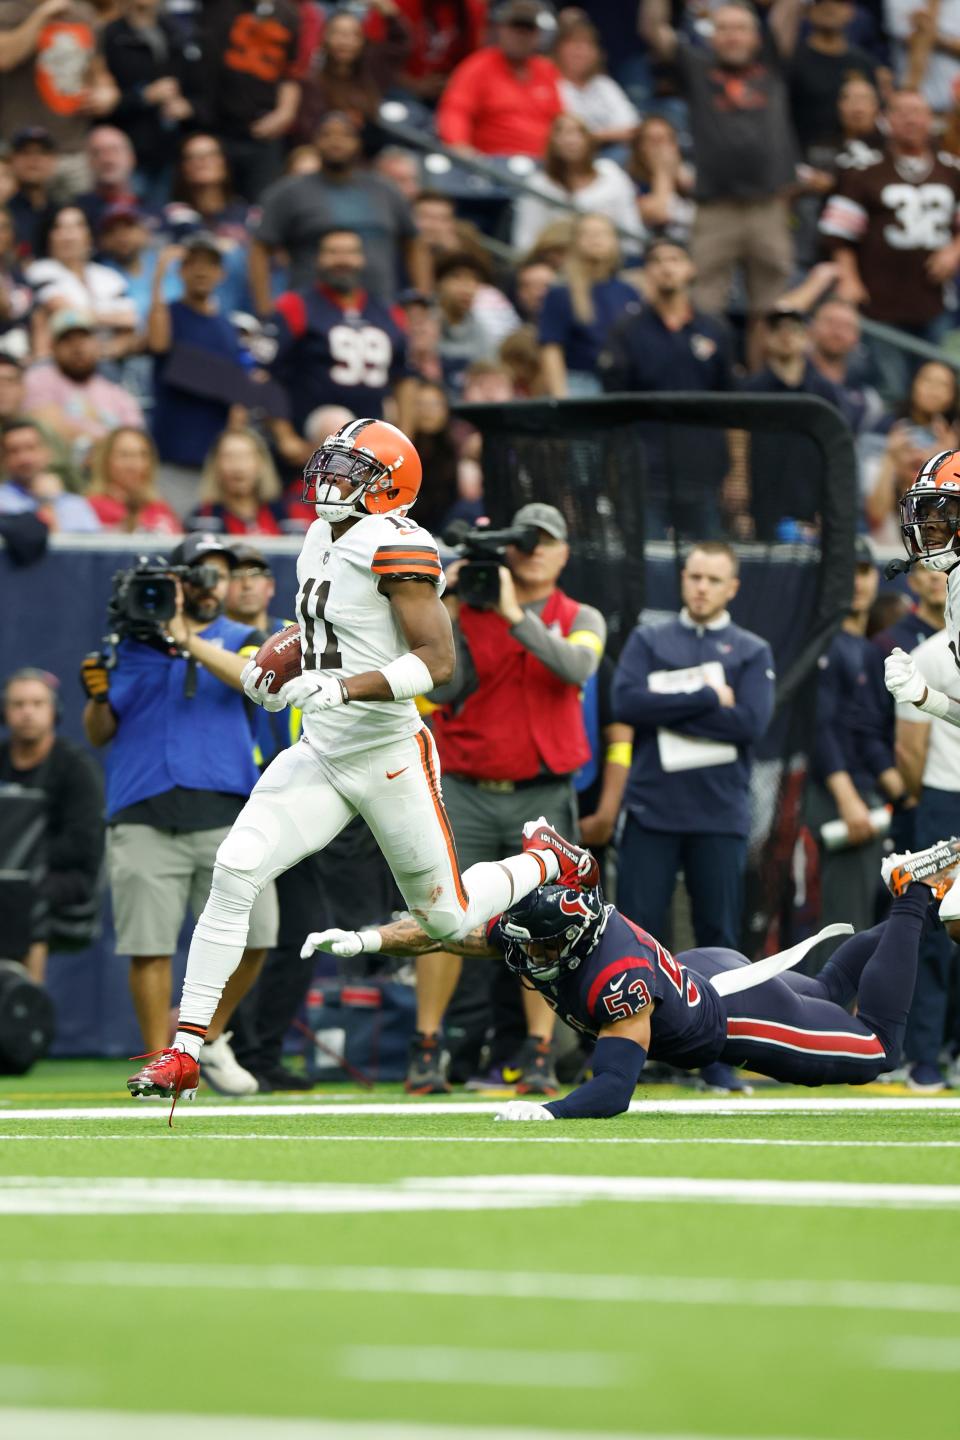 Cleveland Browns wide receiver Donovan Peoples-Jones (11) returns a punt for a touchdown during an NFL football game against the Houston Texans on Sunday, December 4, 2022, in Houston. (AP Photo/Matt Patterson)